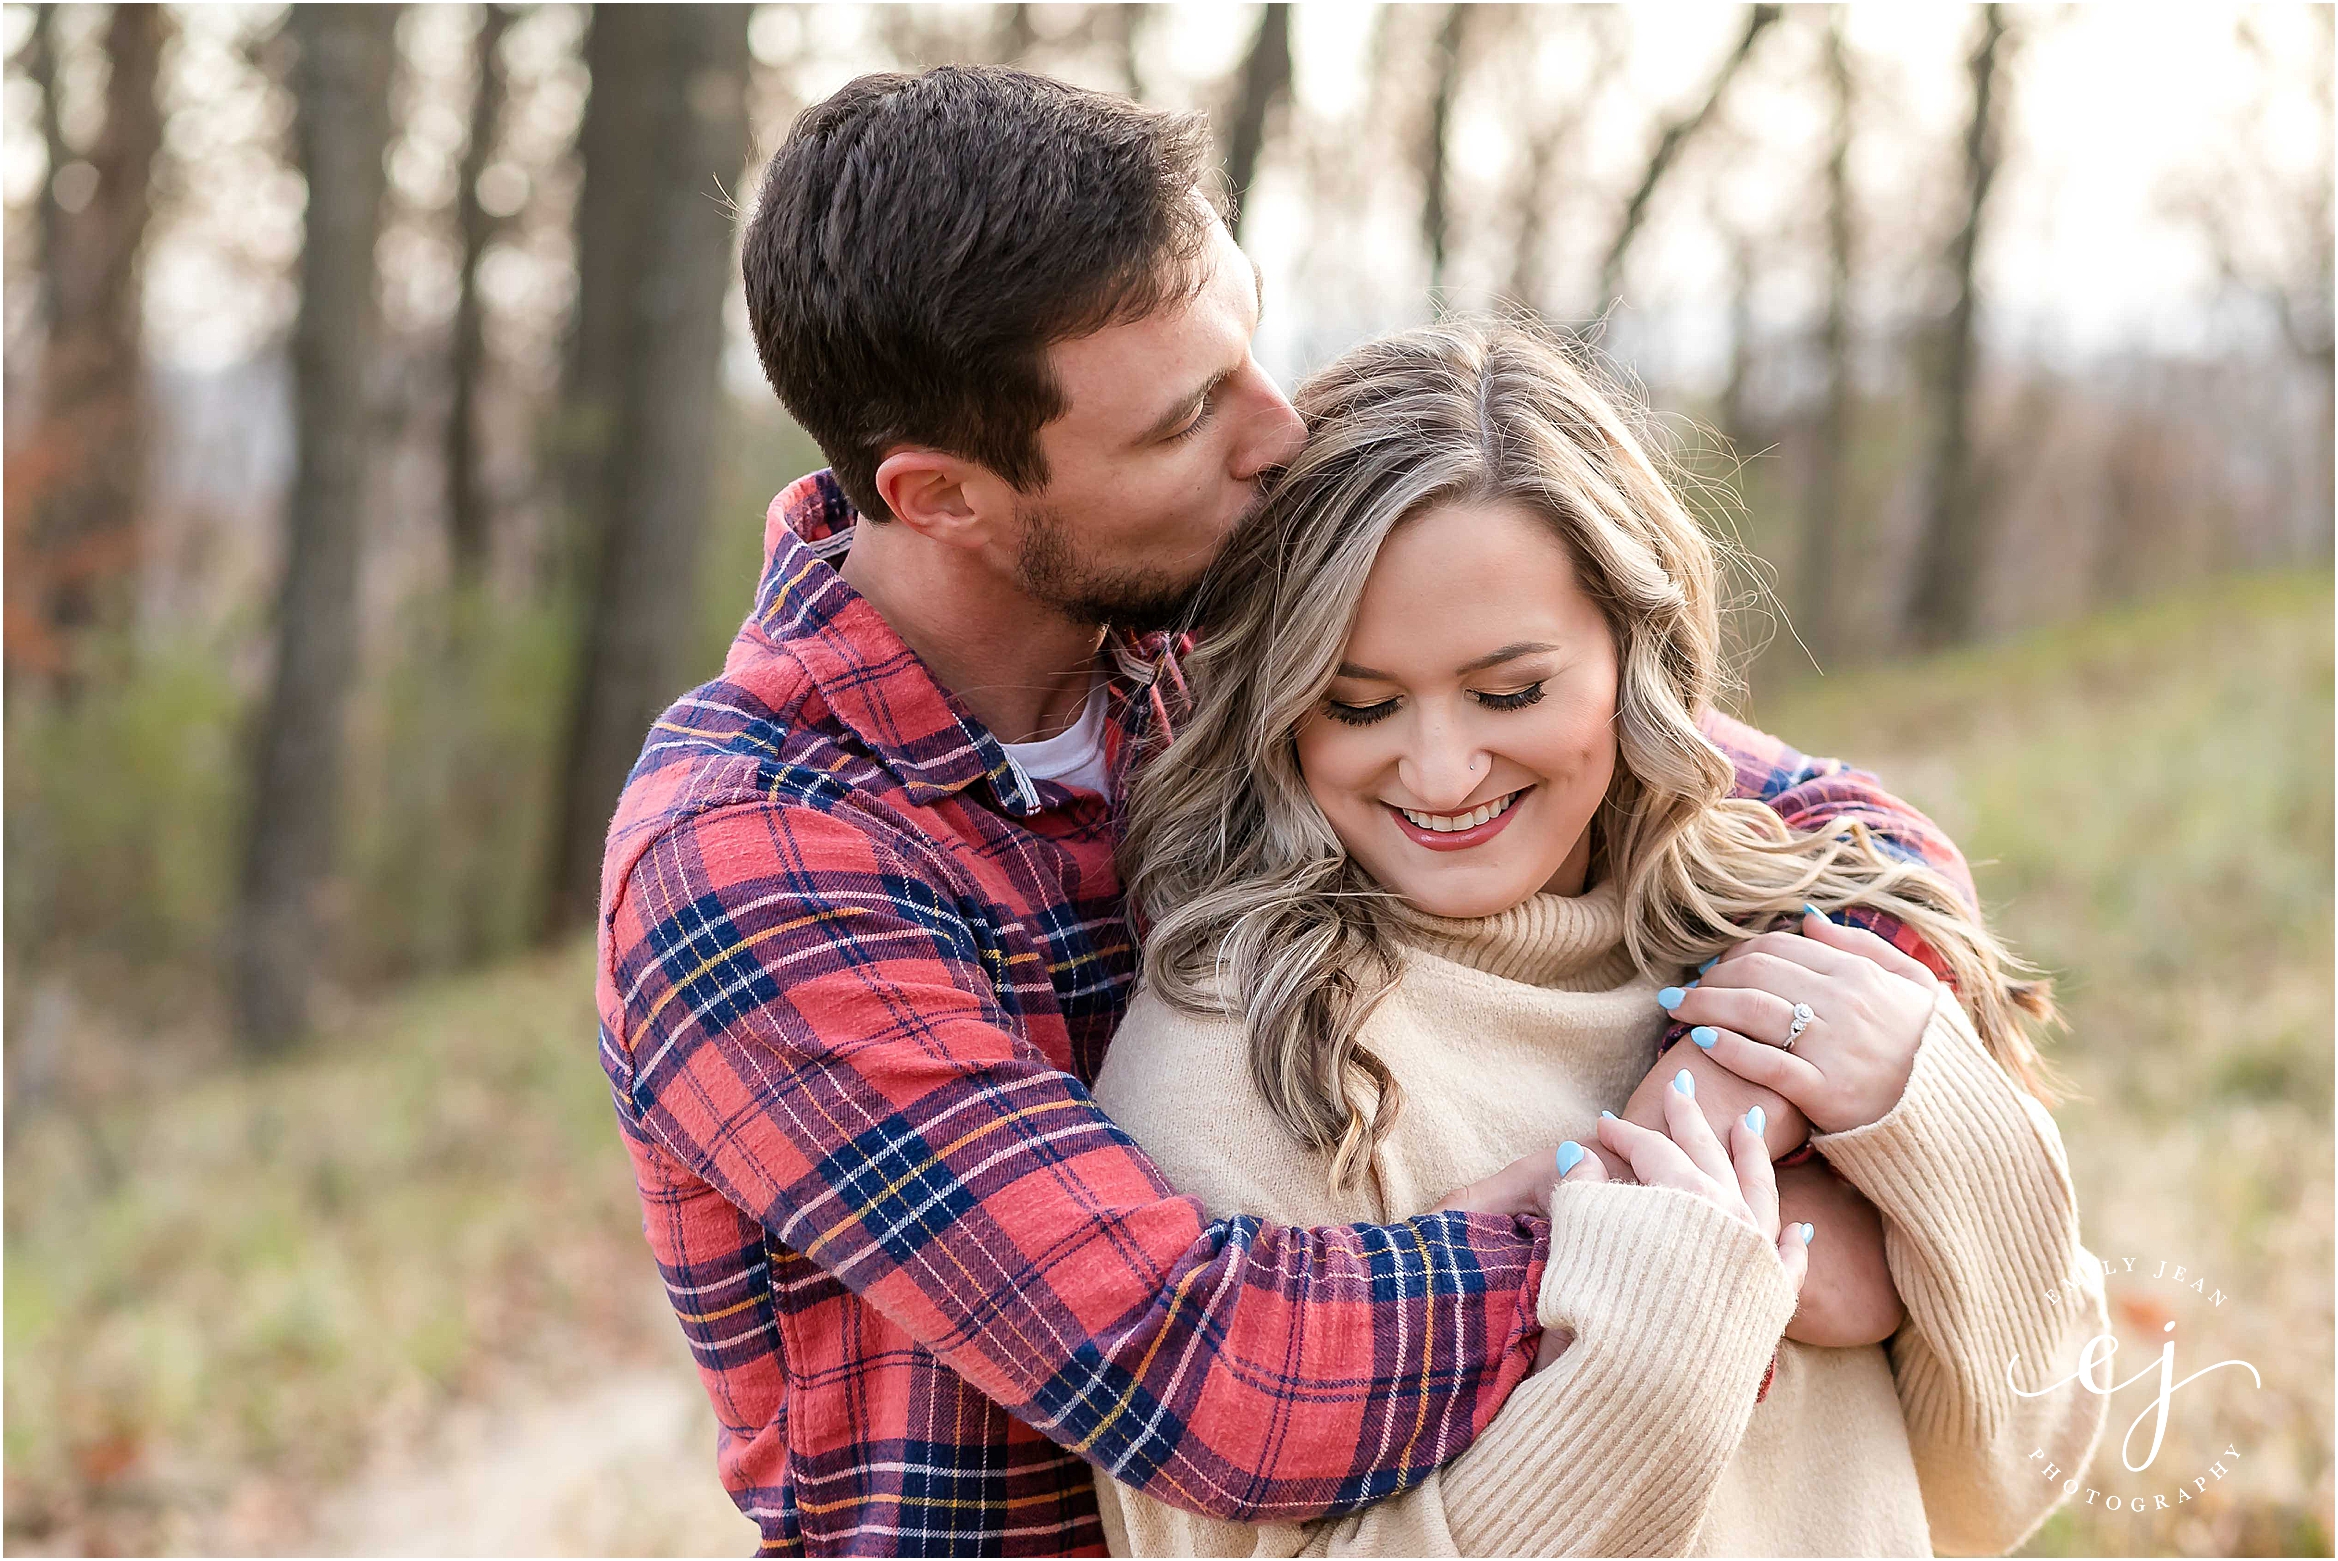 grandad bluff engagement session woman and man kissing head flannel shirt and beige turtleneck sweater